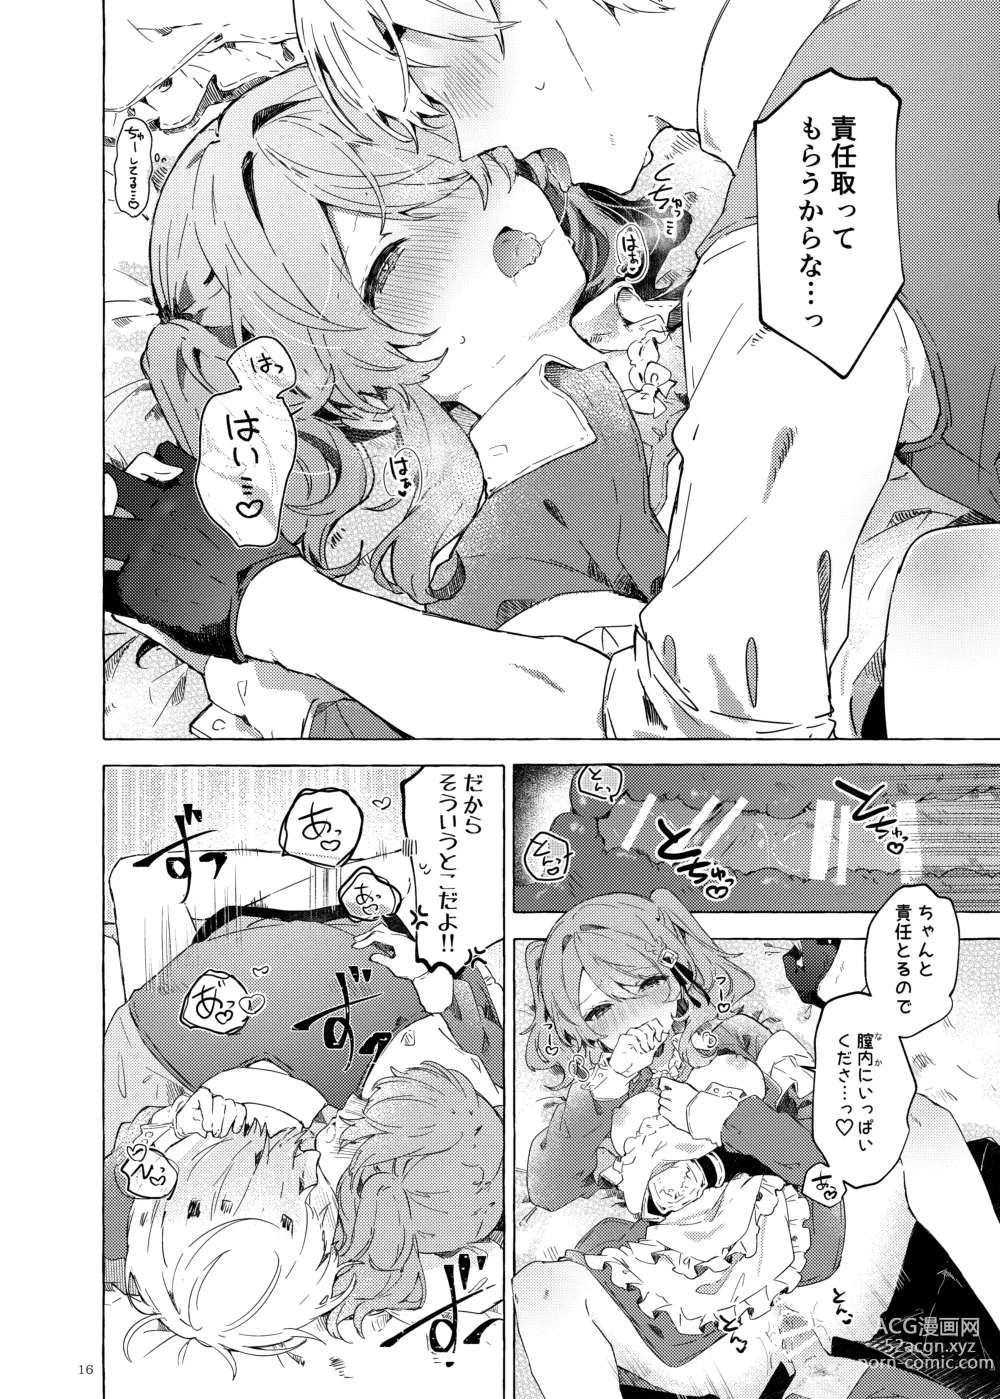 Page 15 of doujinshi Because I Love You!